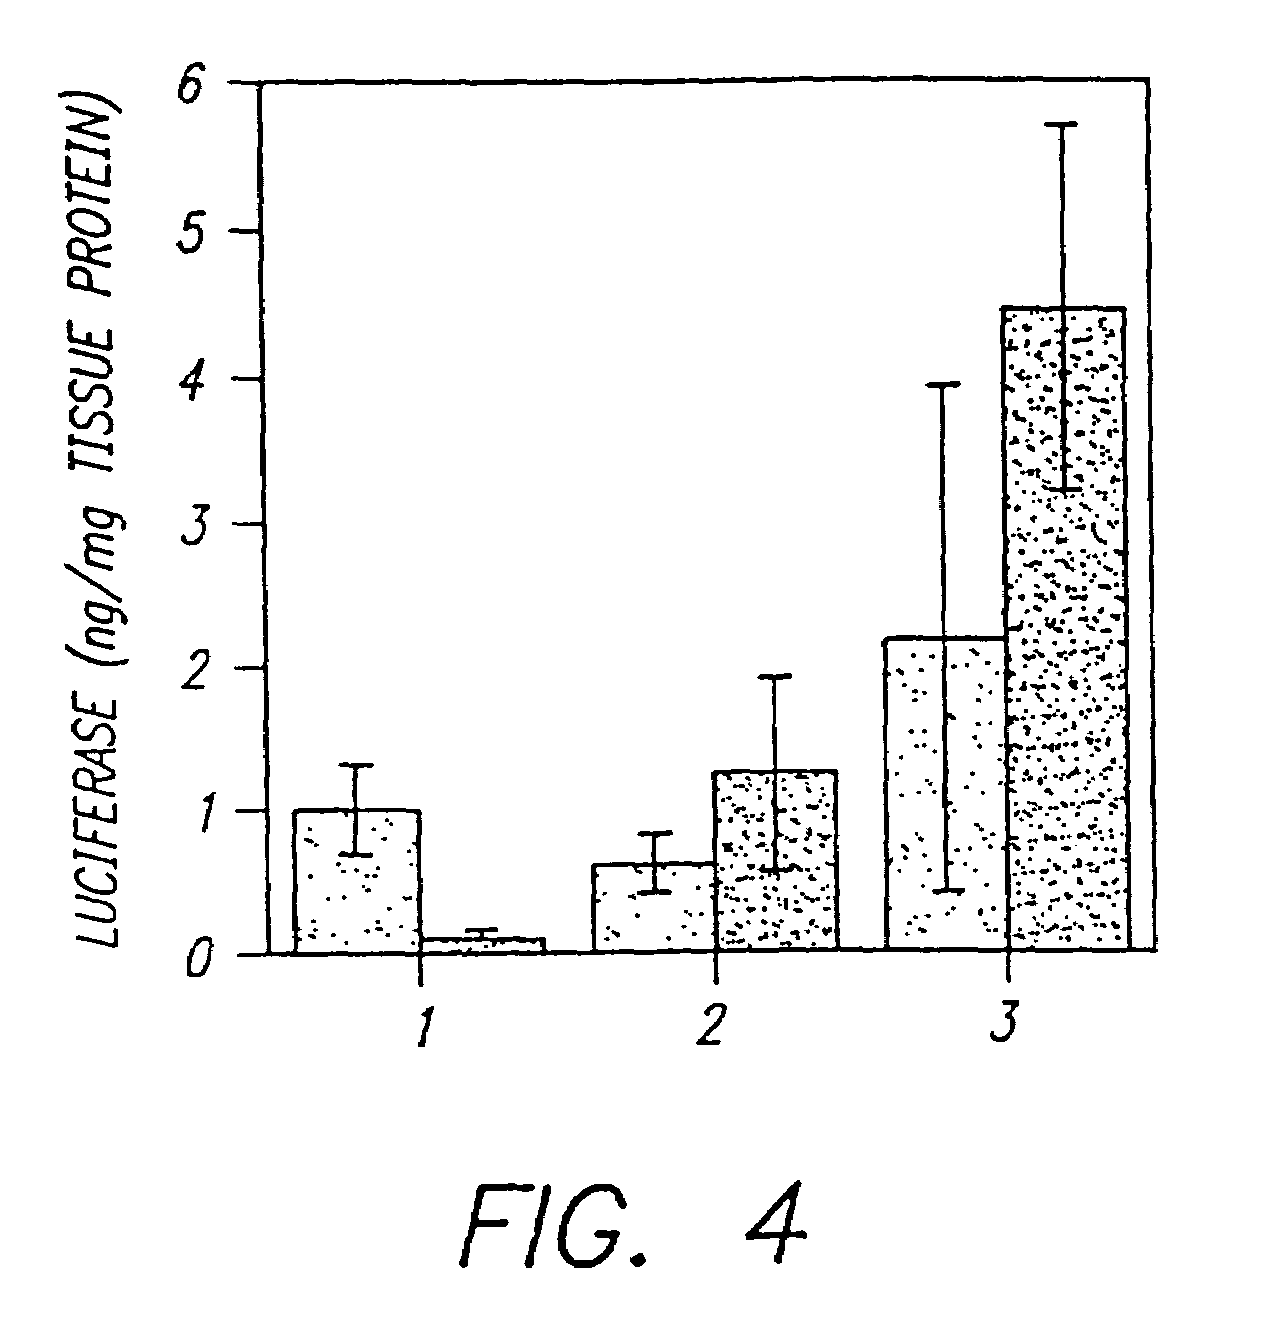 Methods for attaching proteins to lipidic microparticles with high efficiency